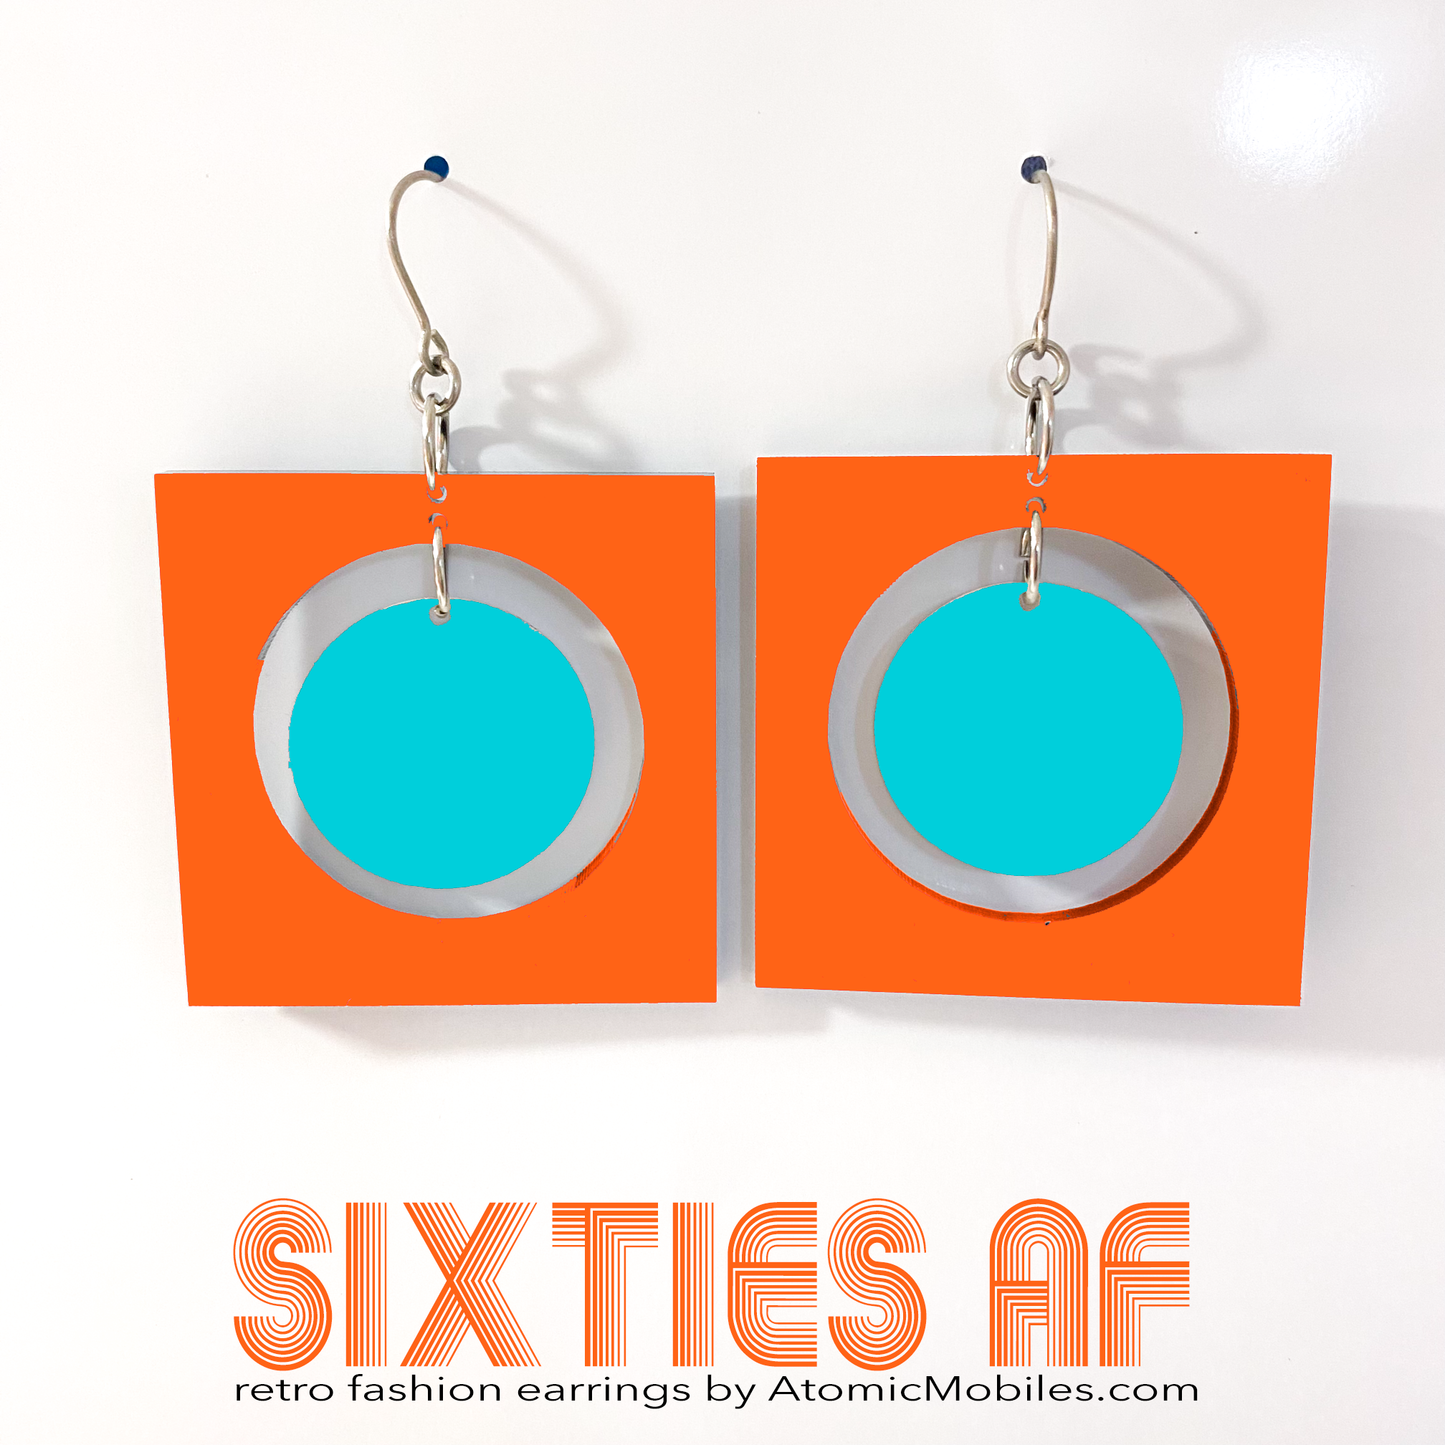 SIXTIES AF groovy retro fashion earrings inspired by the 1960s in orange and aqua - by AtomicMobiles.com